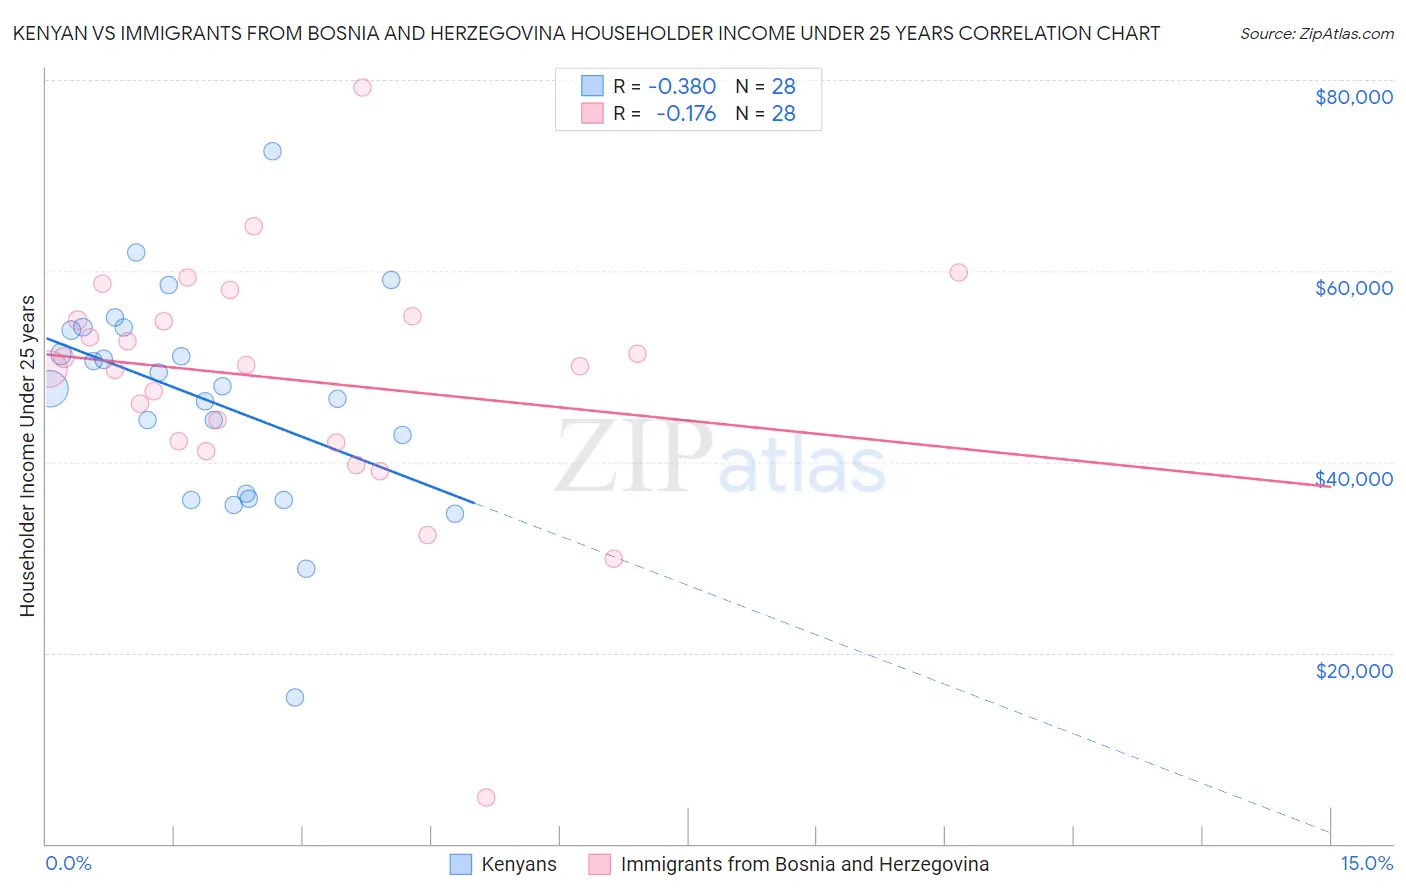 Kenyan vs Immigrants from Bosnia and Herzegovina Householder Income Under 25 years